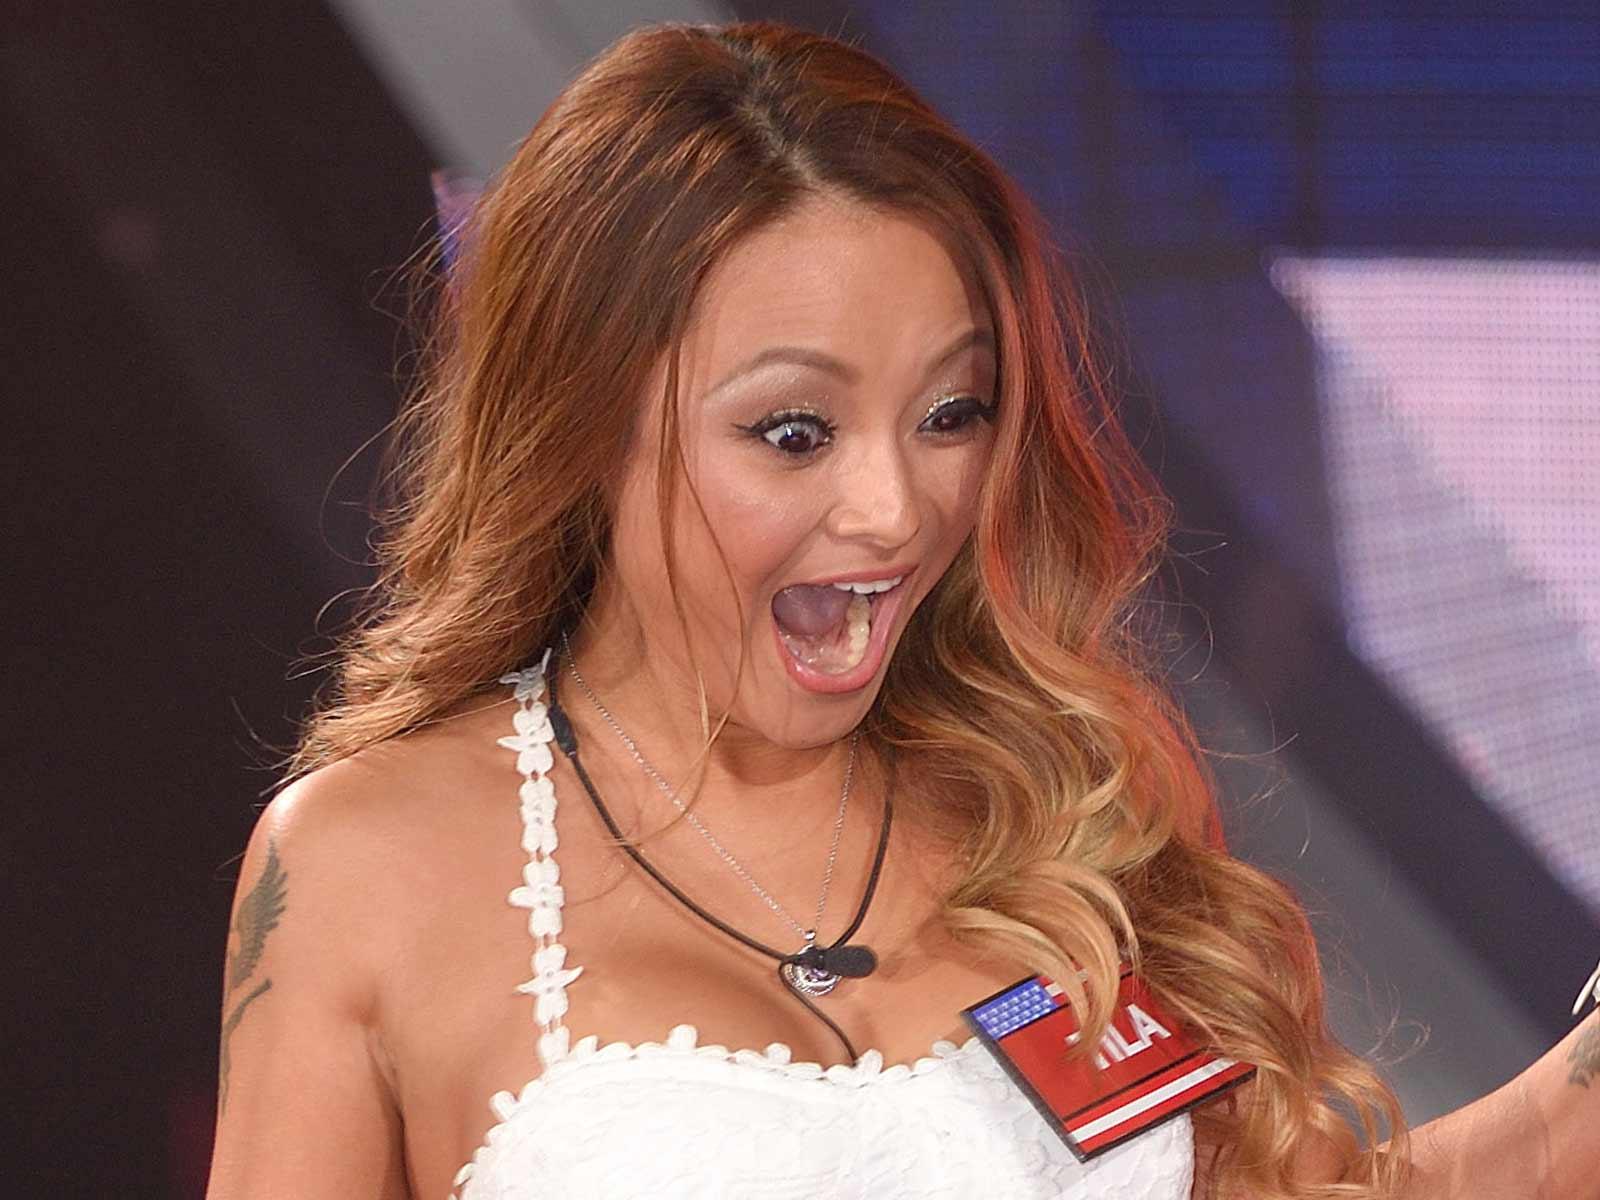 Tila Tequila in Custody War Over 4-Year-Old Daughter, Ex Alleges ‘Child Neglect’